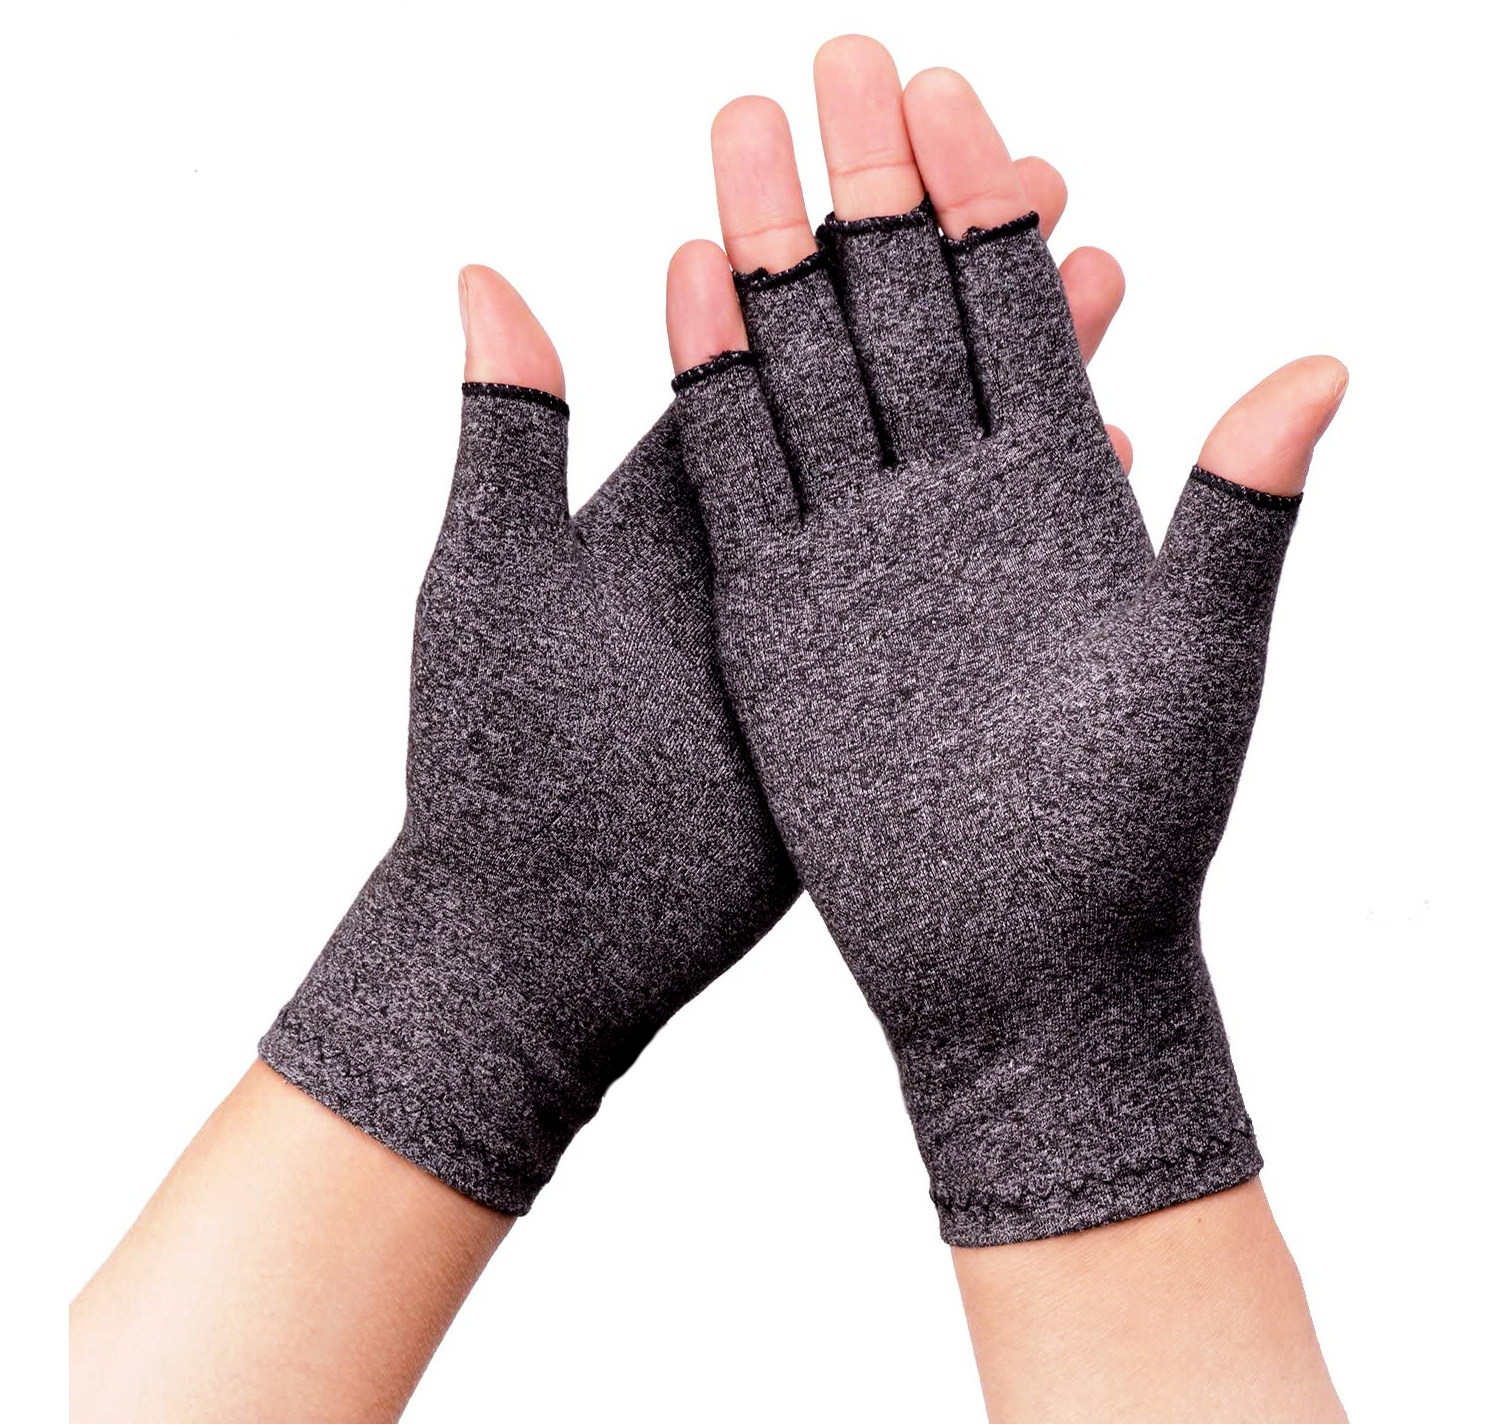 compression gloves for arthritis in hands